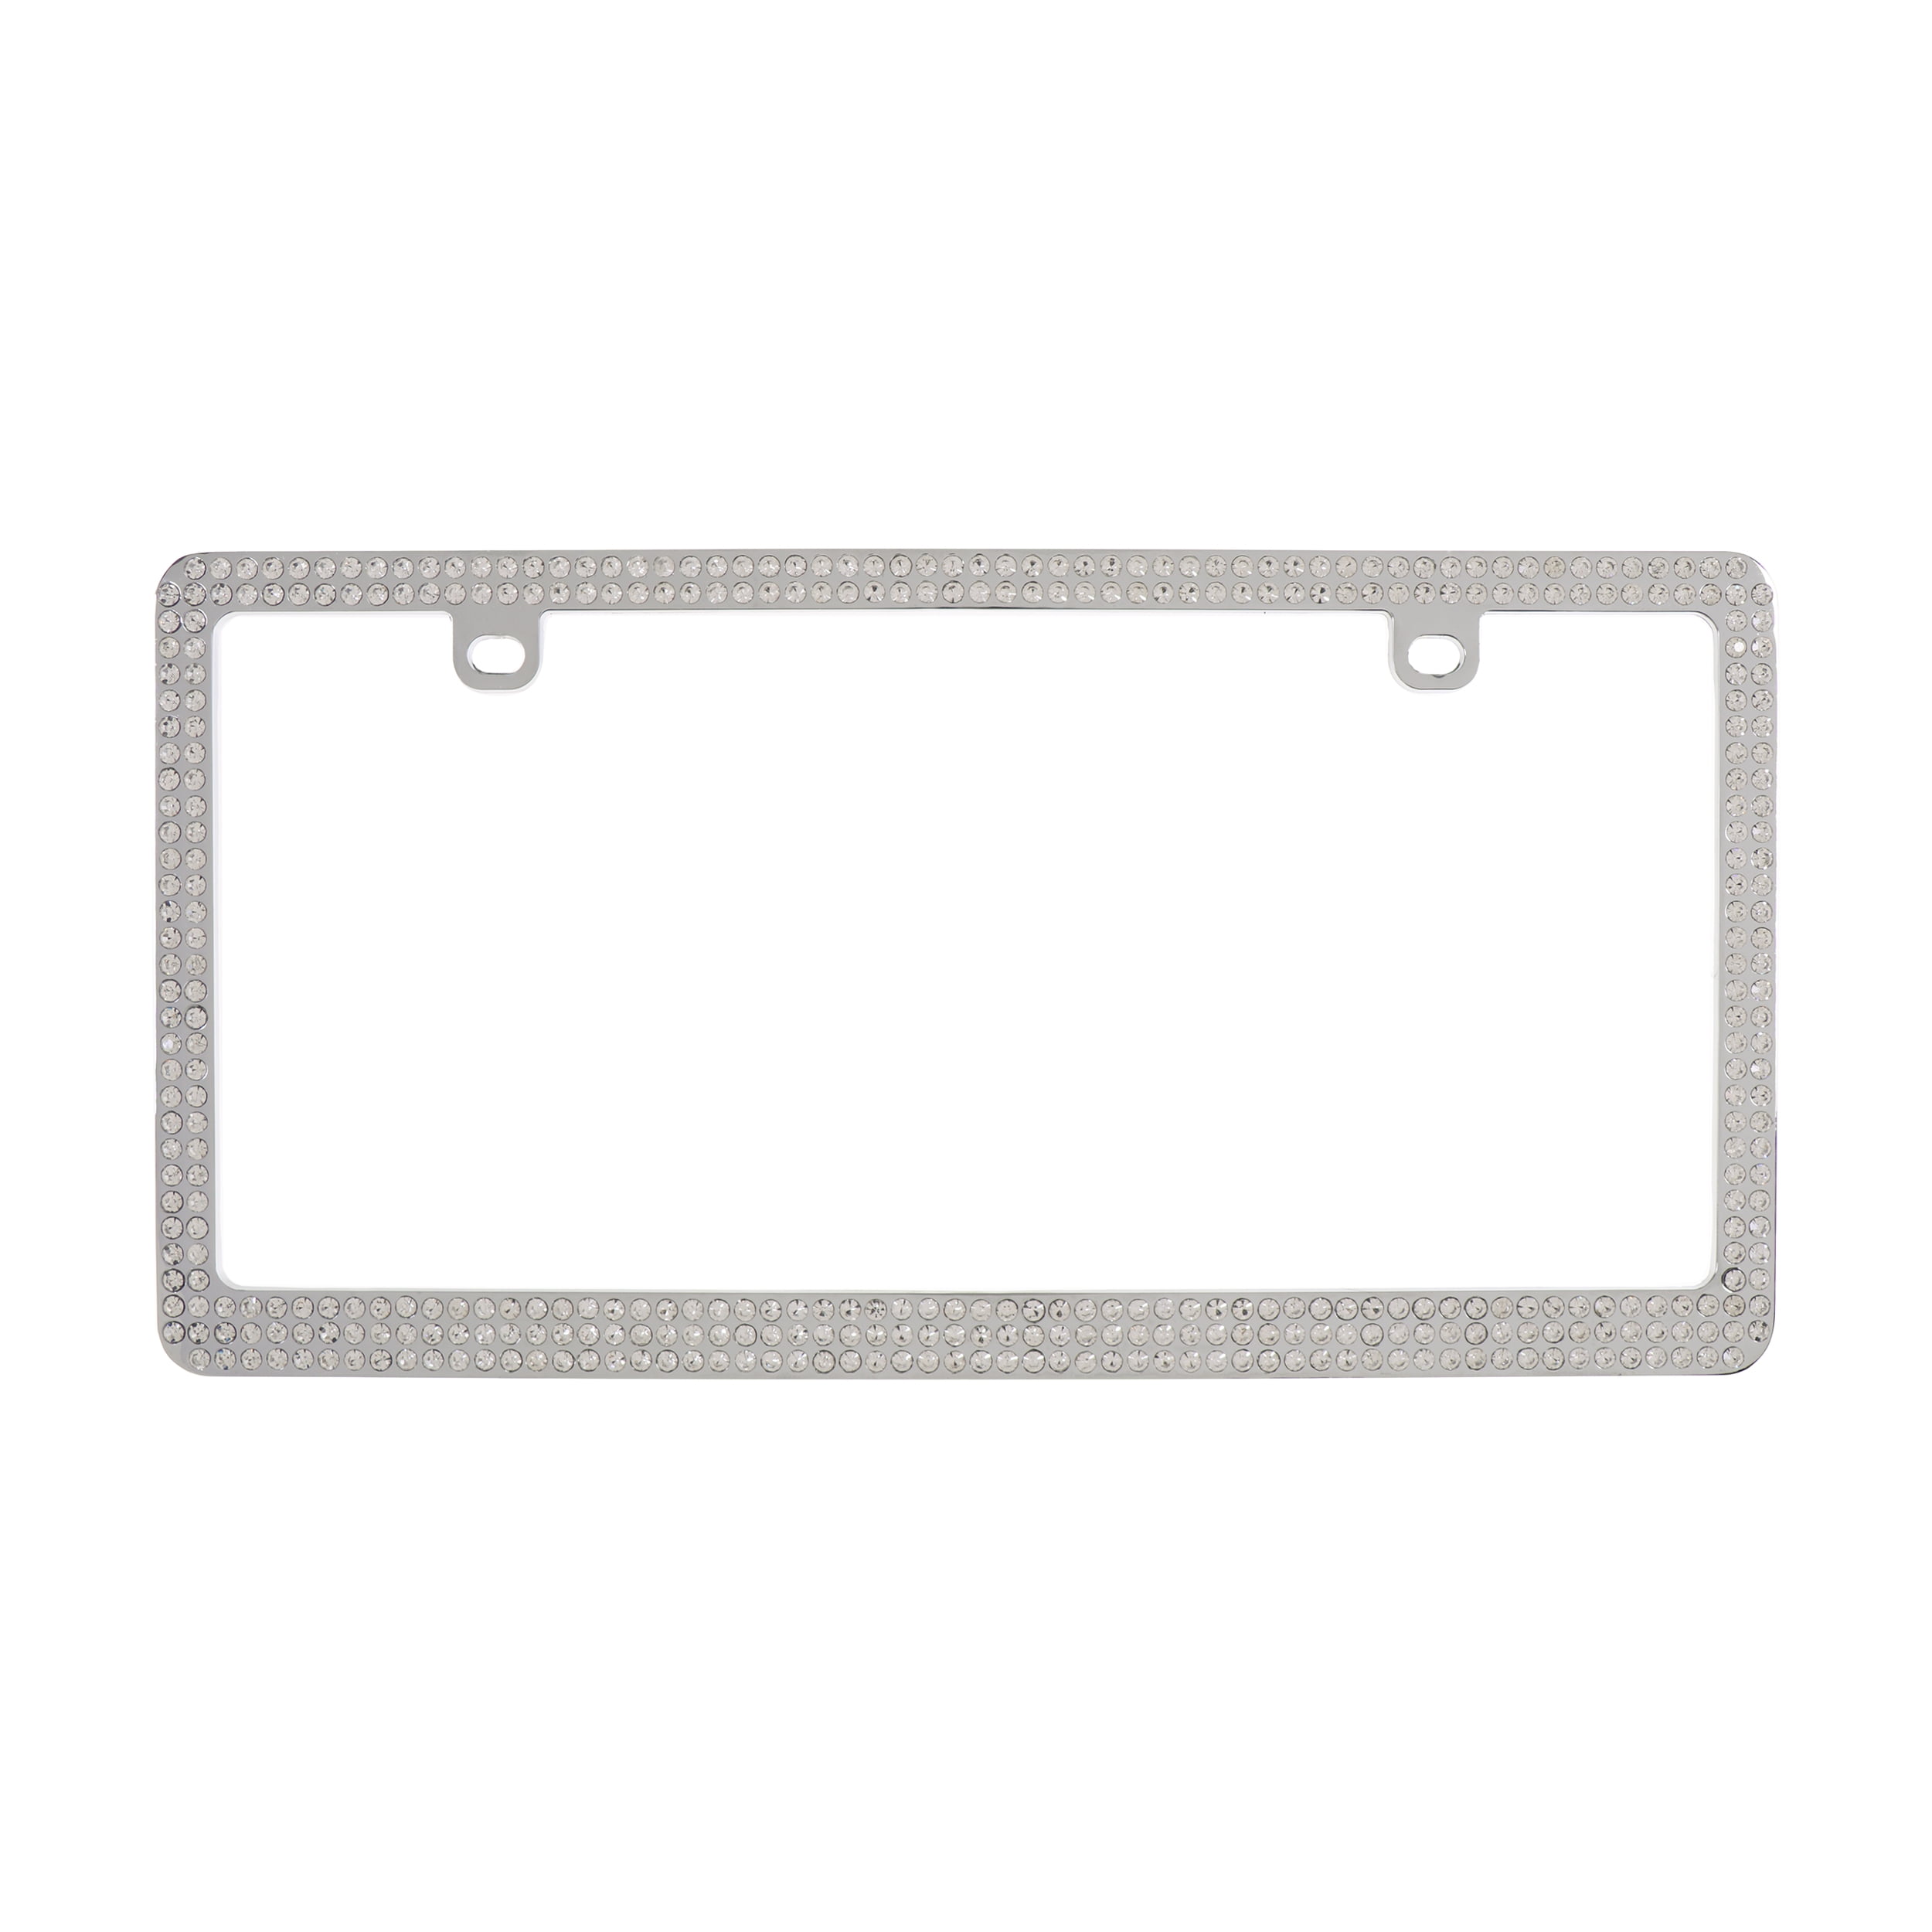 Auto Drive Universal License Plate Frame - Chrome Bling, 92860W